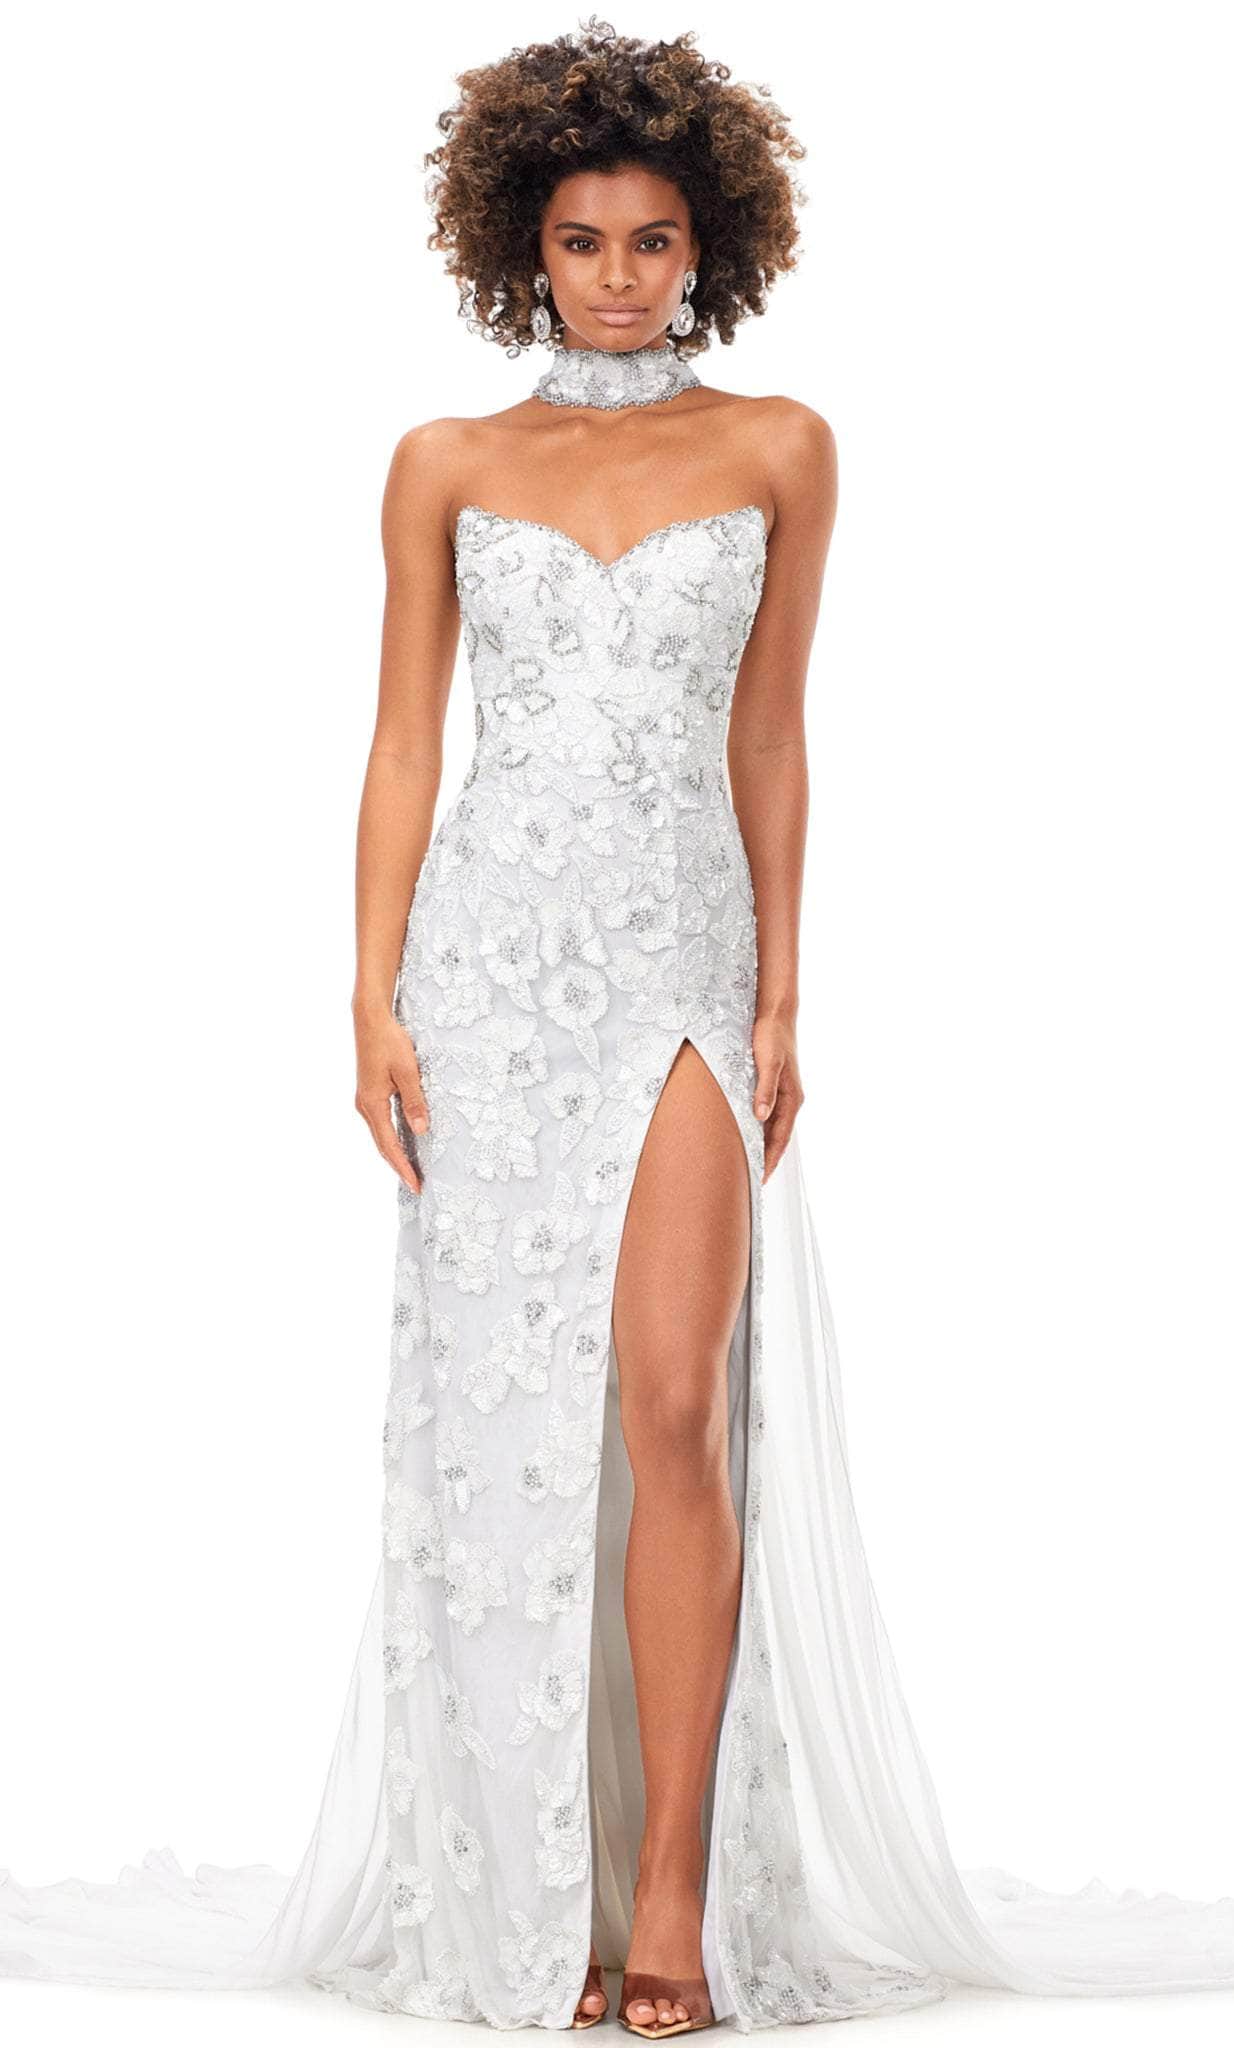 Image of Ashley Lauren 11351 - Strapless Sweetheart Neck Evening Gown